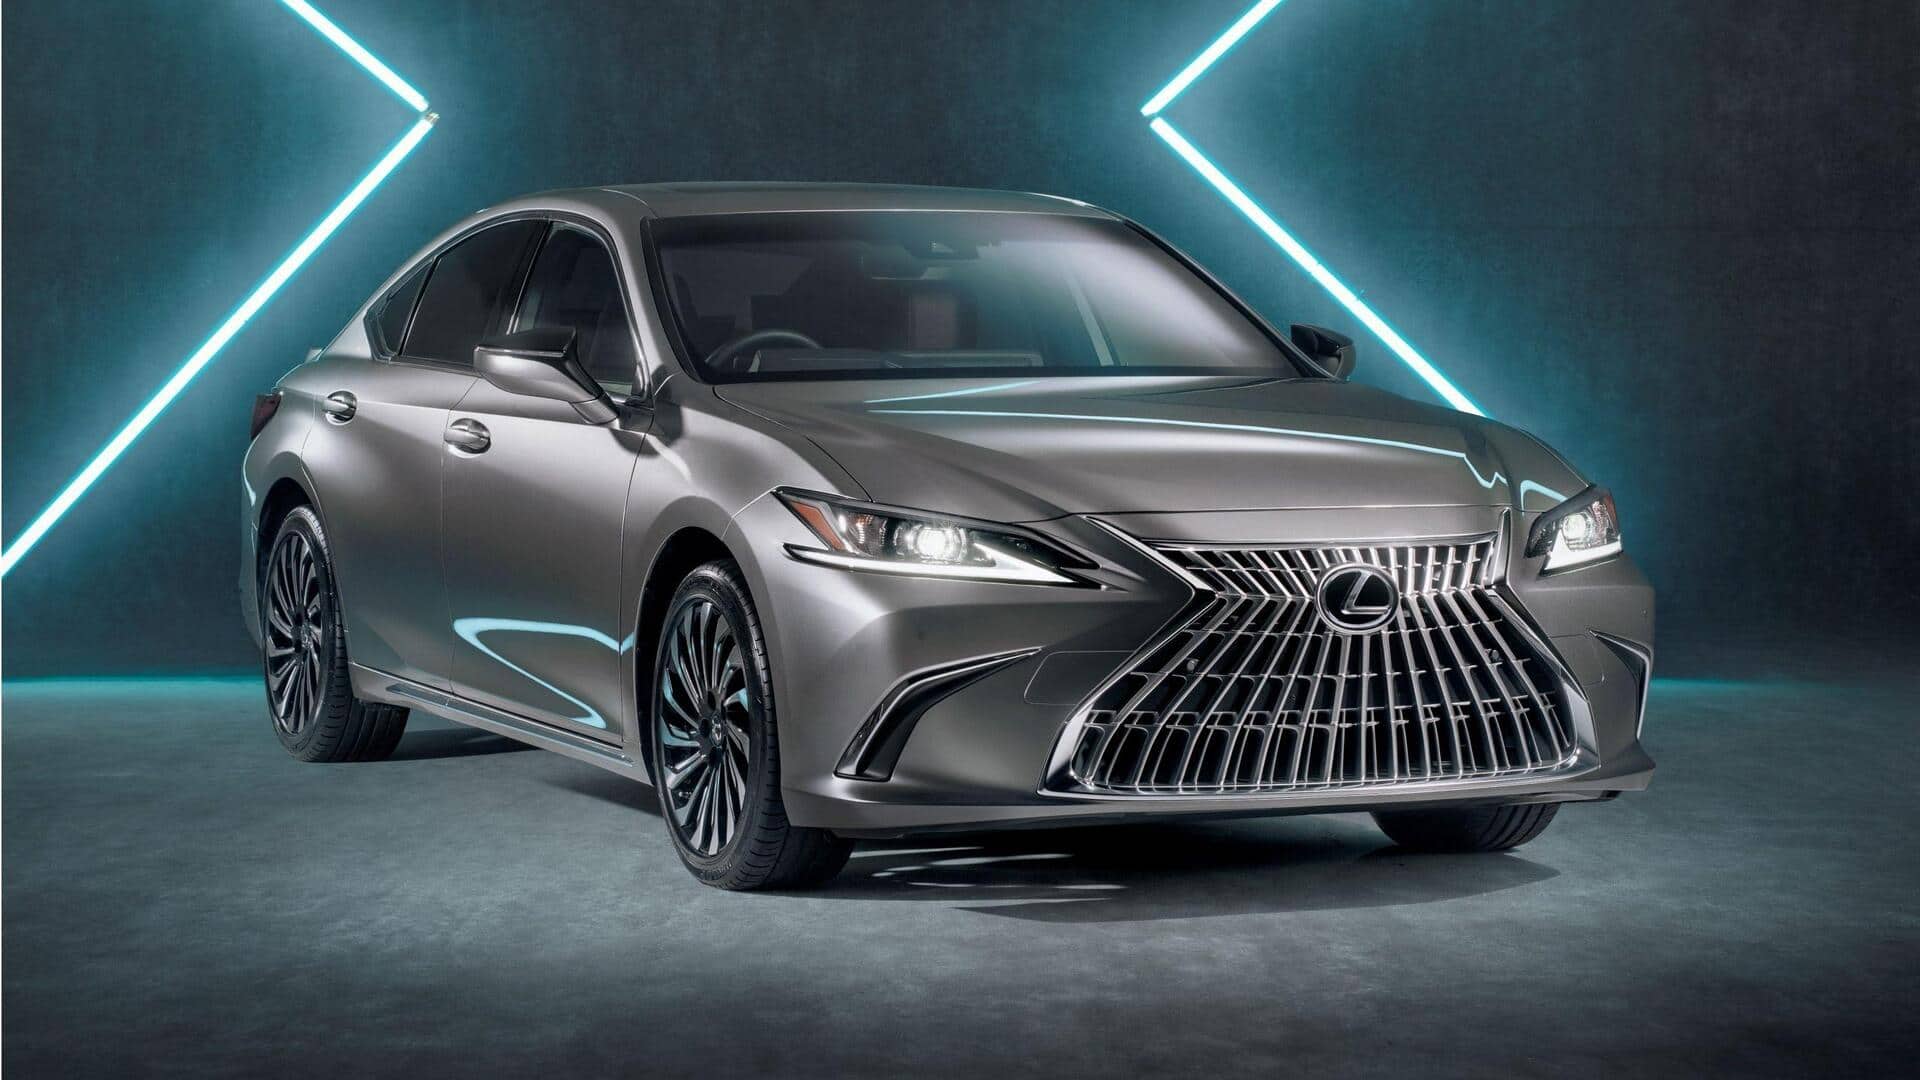 Limited-edition Lexus ES Crafted Collection 2023 goes official: Check features